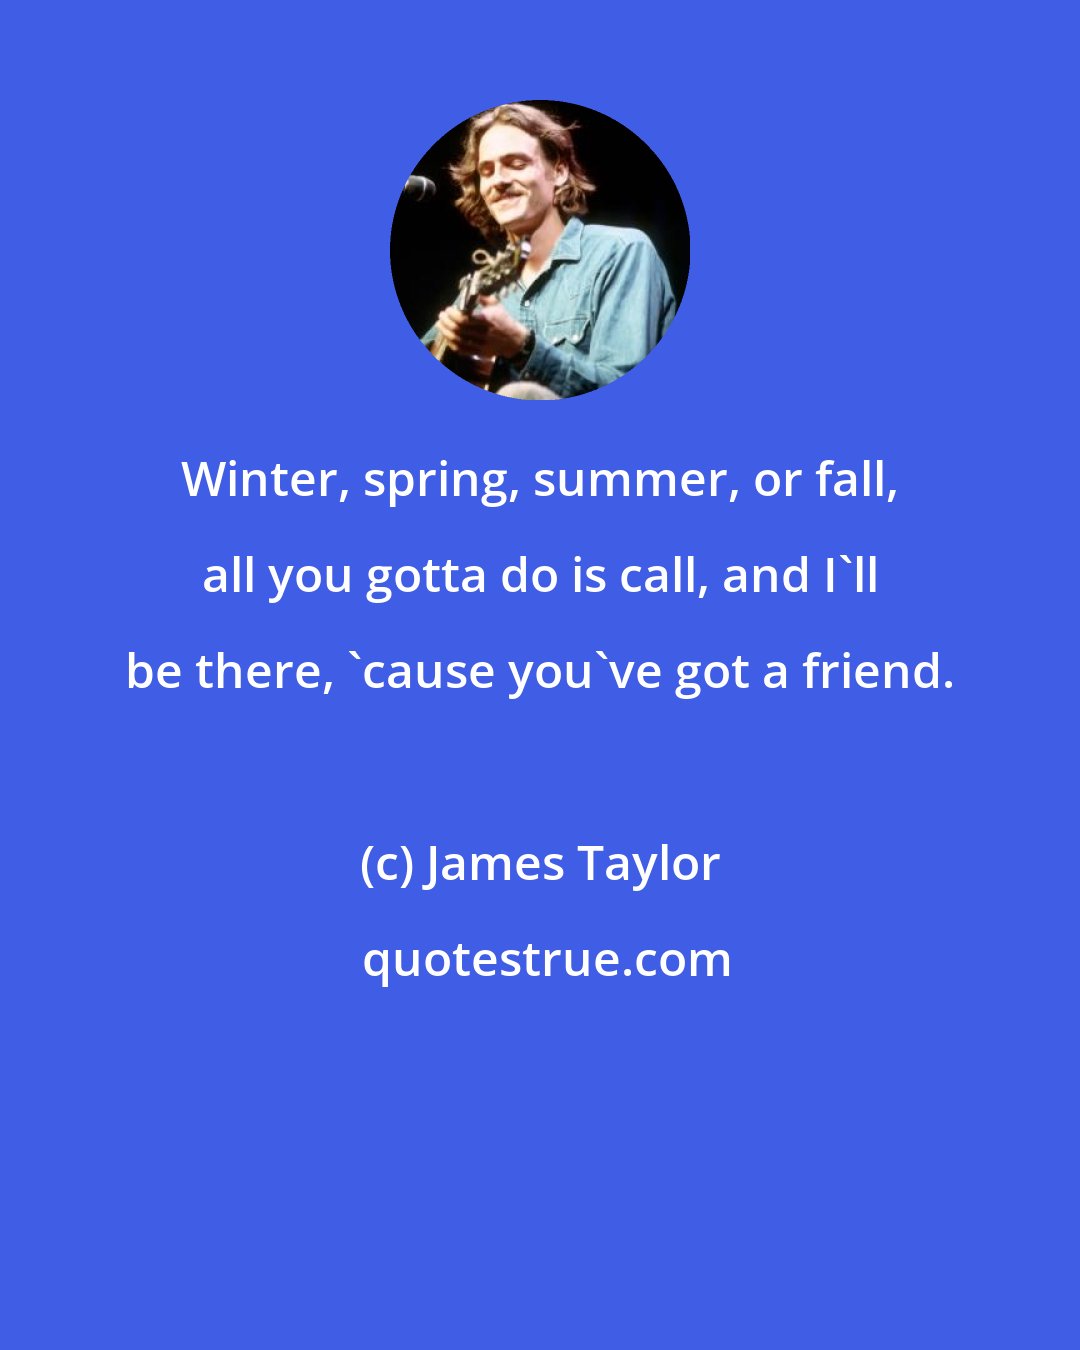 James Taylor: Winter, spring, summer, or fall, all you gotta do is call, and I'll be there, 'cause you've got a friend.